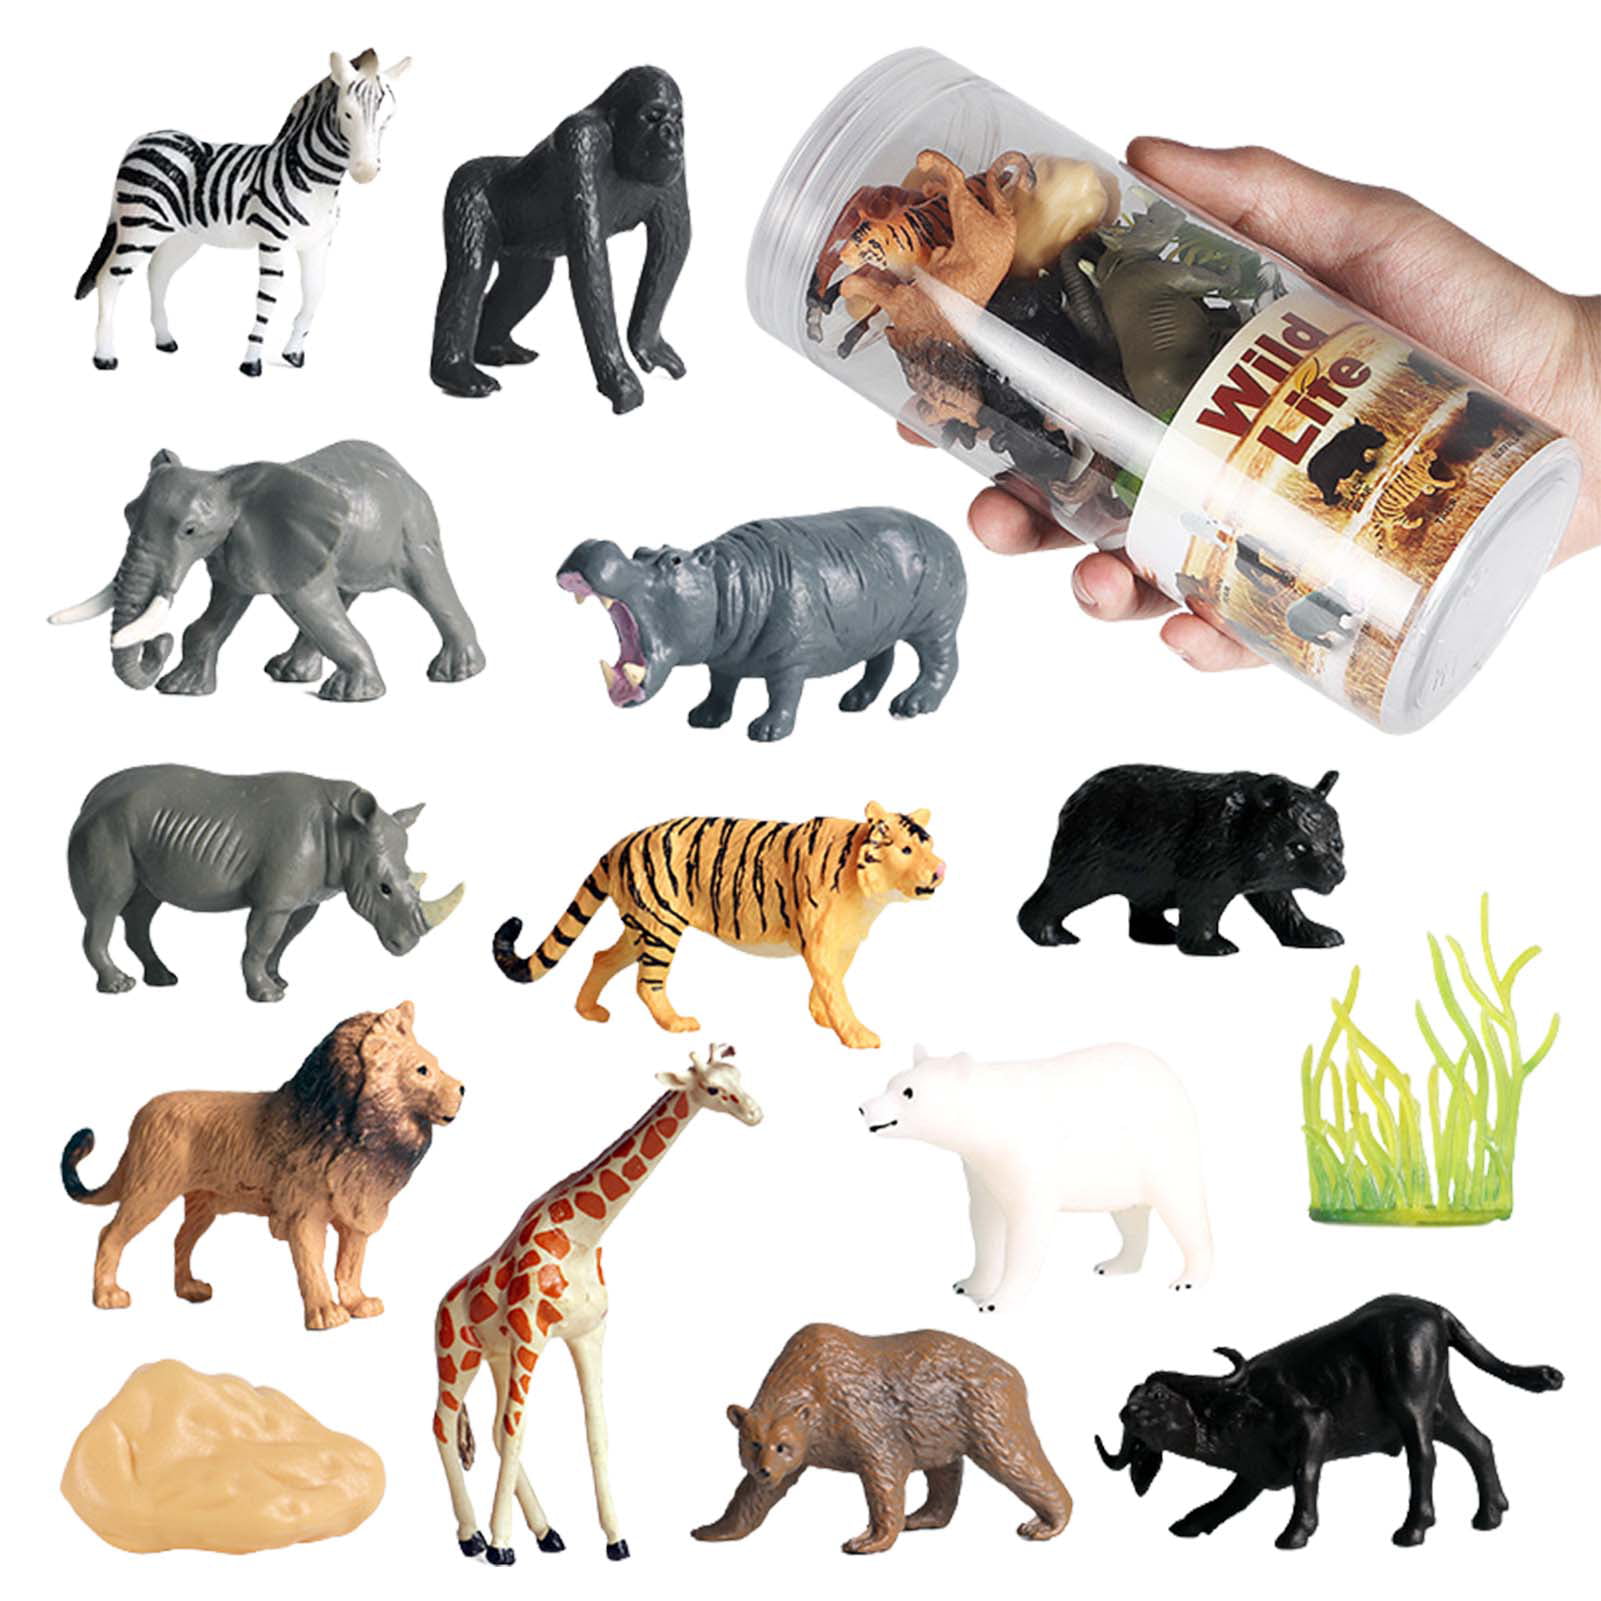 huoge 12-PCS Woodland Animal Figurines - Educational Animals Figurines  Miniature | Hand Painting Realistic Animal Toys for Christmas Party  Decorations 